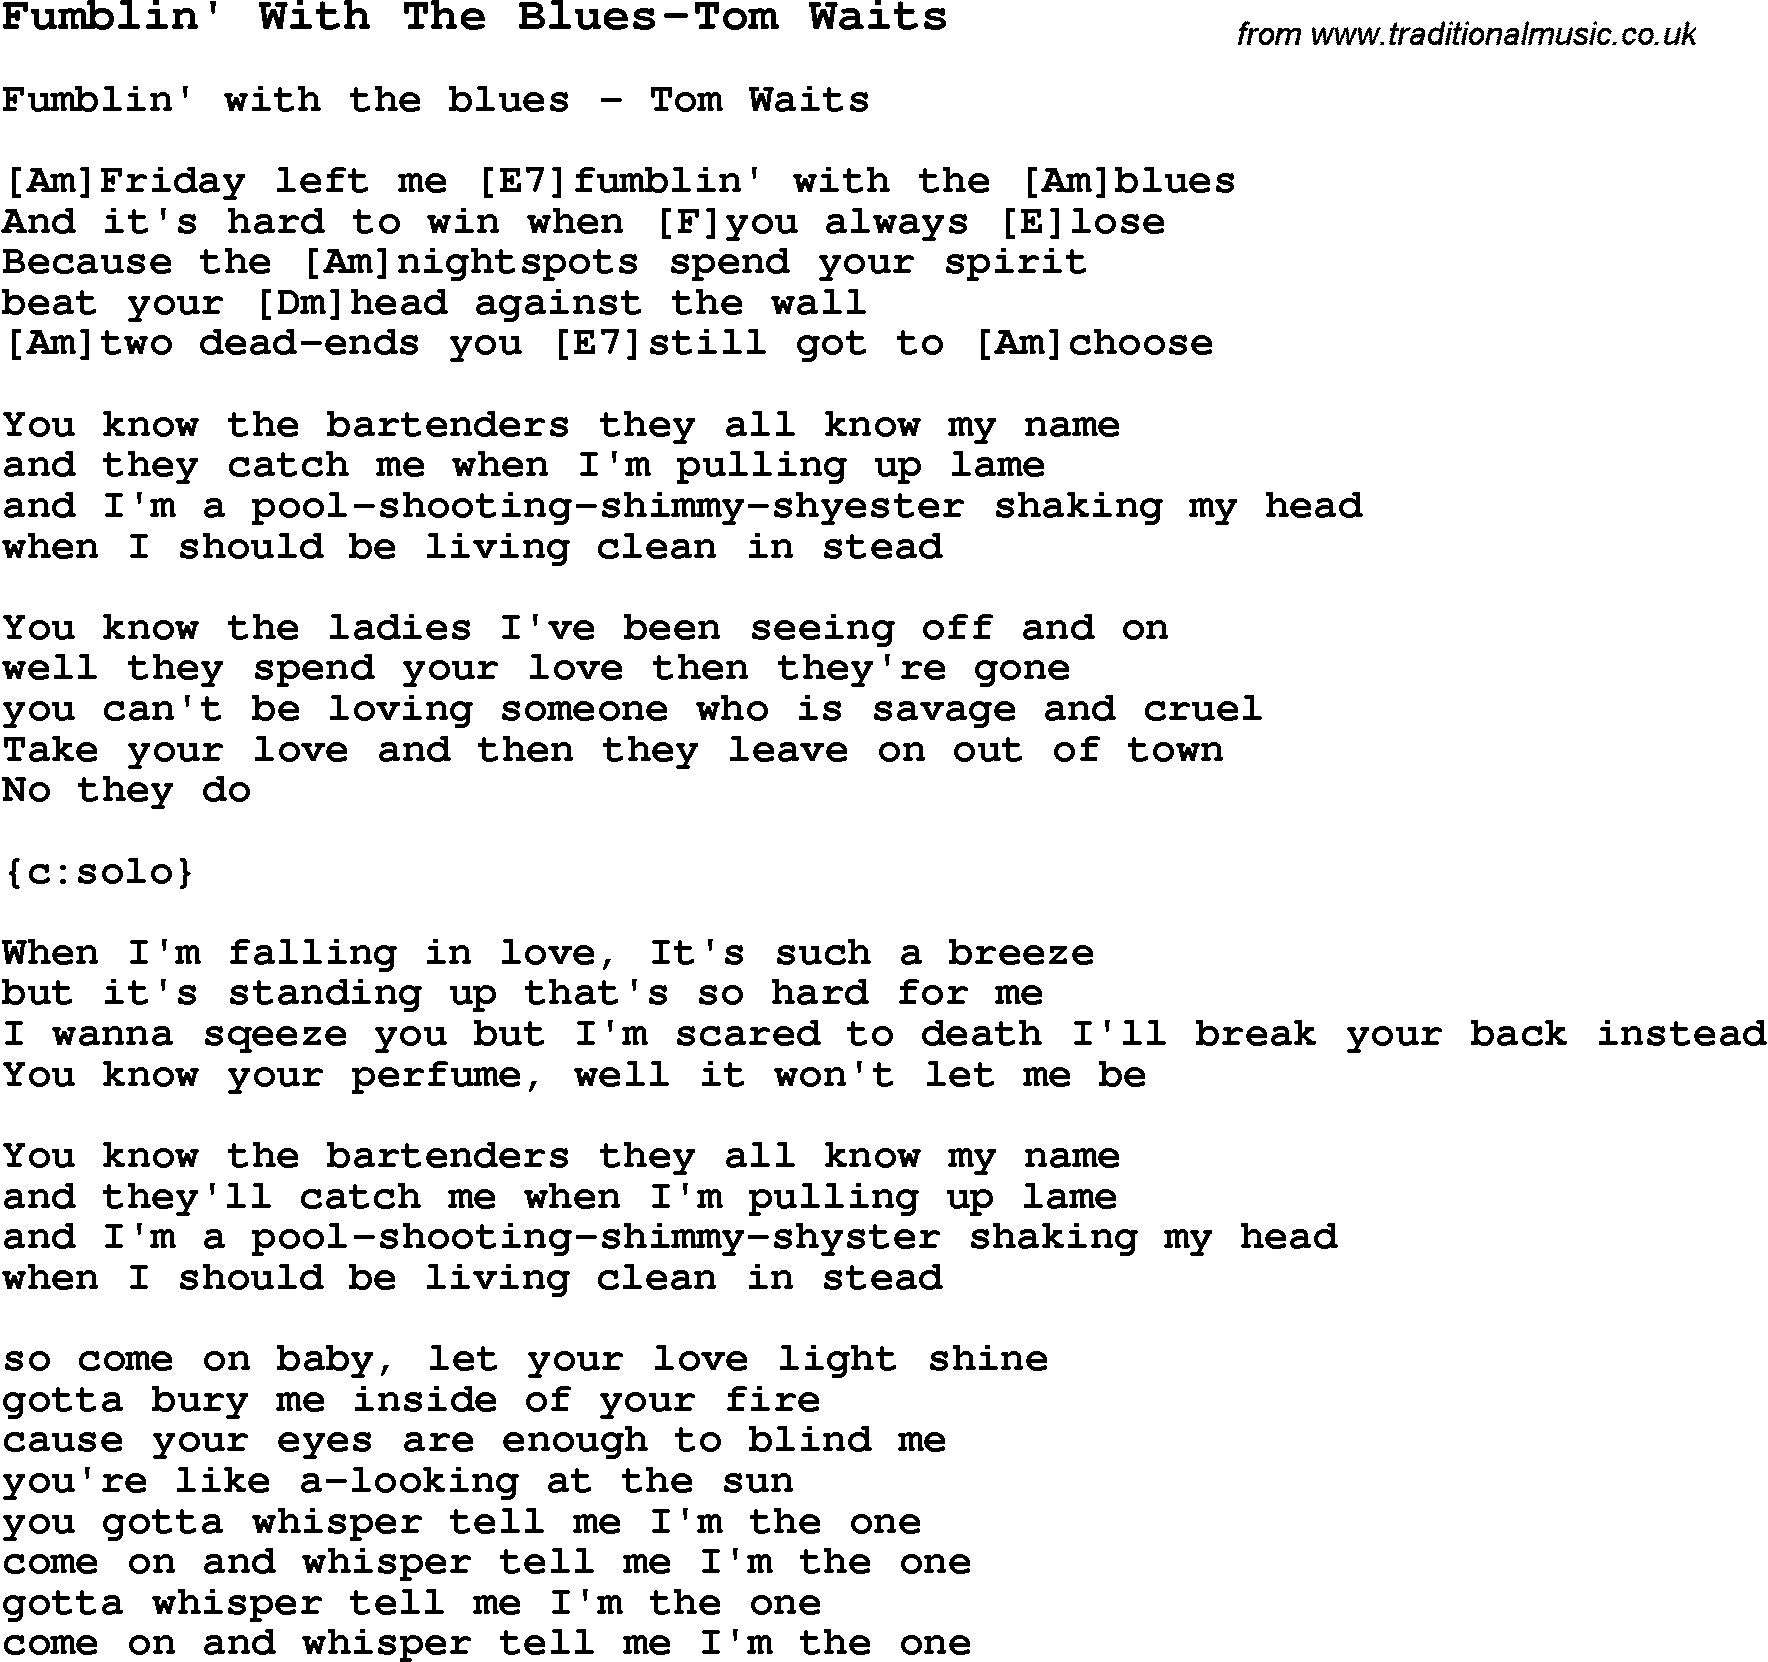 Blues Guitar Song, lyrics, chords, tablature, playing hints for Fumblin' With The Blues-Tom Waits